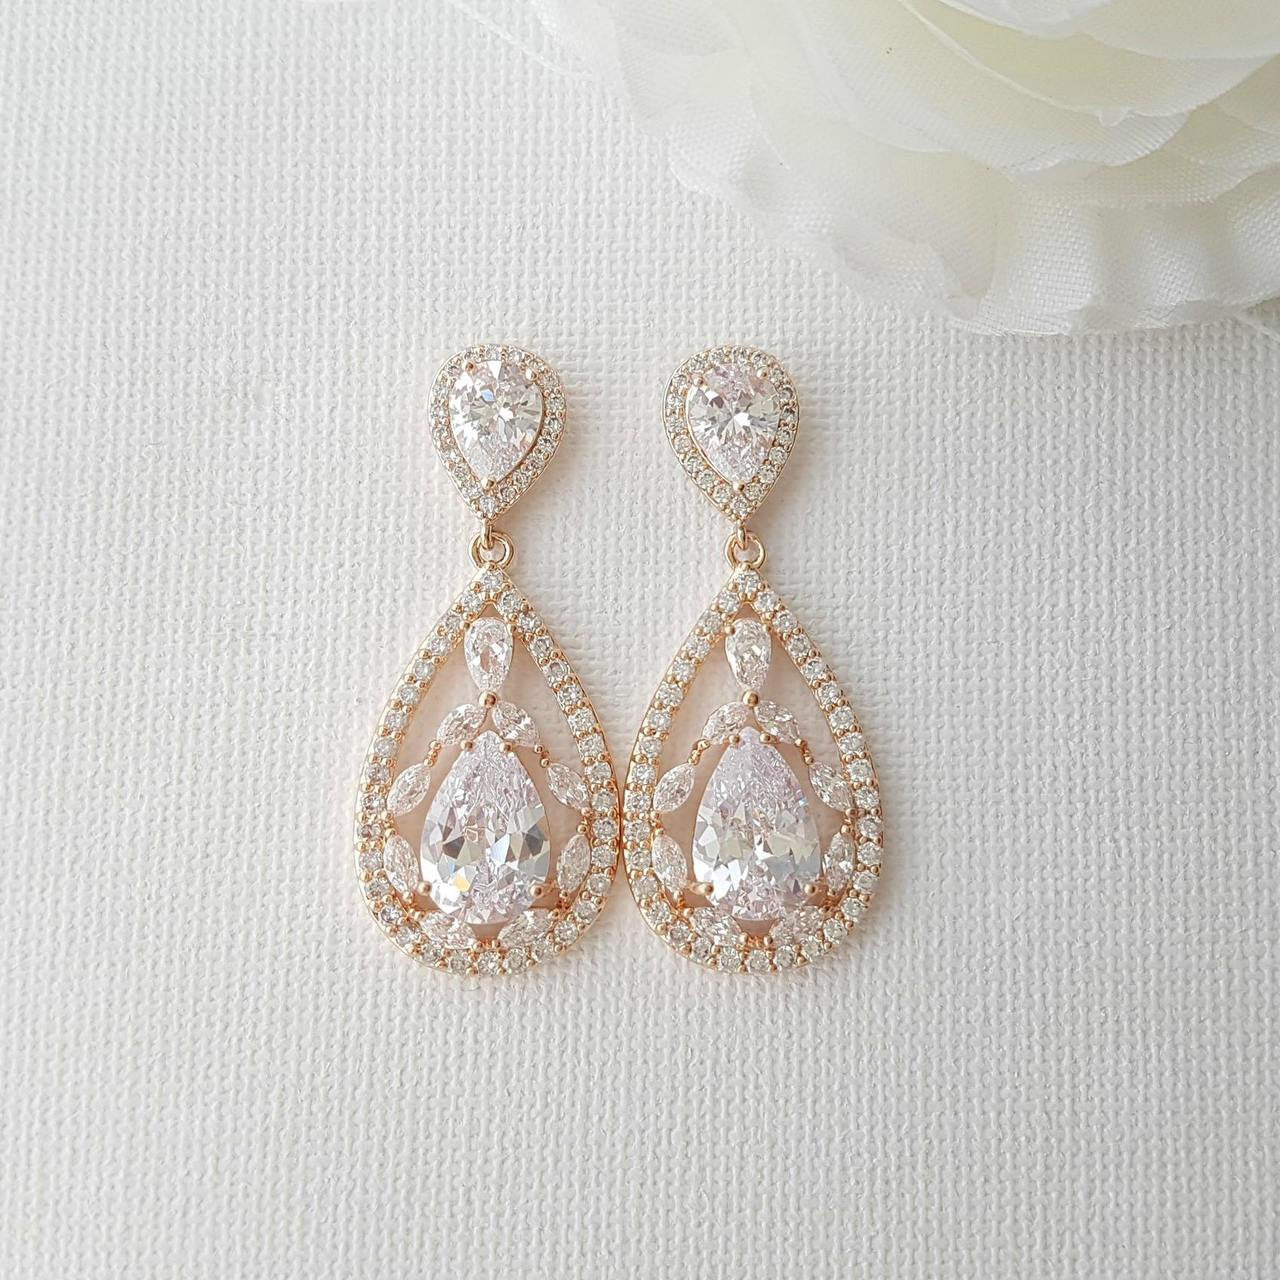 Wedding Rose Gold CLIP ON Earrings Crystal Bridal Earrings Gold Teardrop Earrings Wedding Earrings Non Pierced Ears Bridal Jewelry, Esther